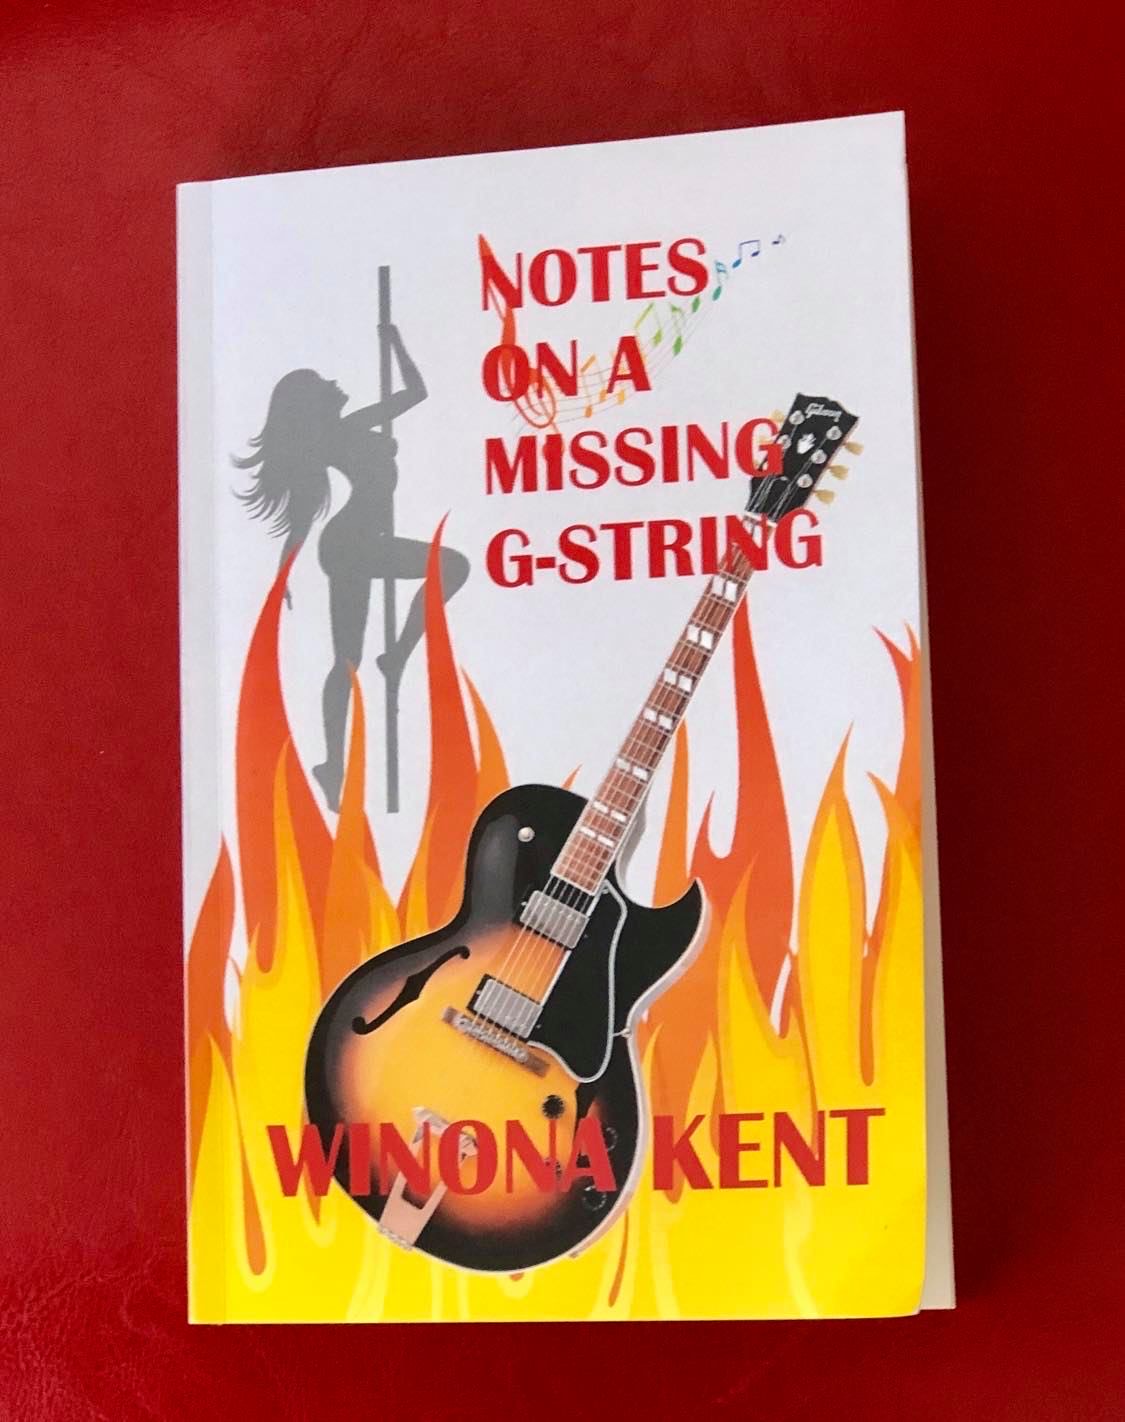 Notes on a Missing G-String